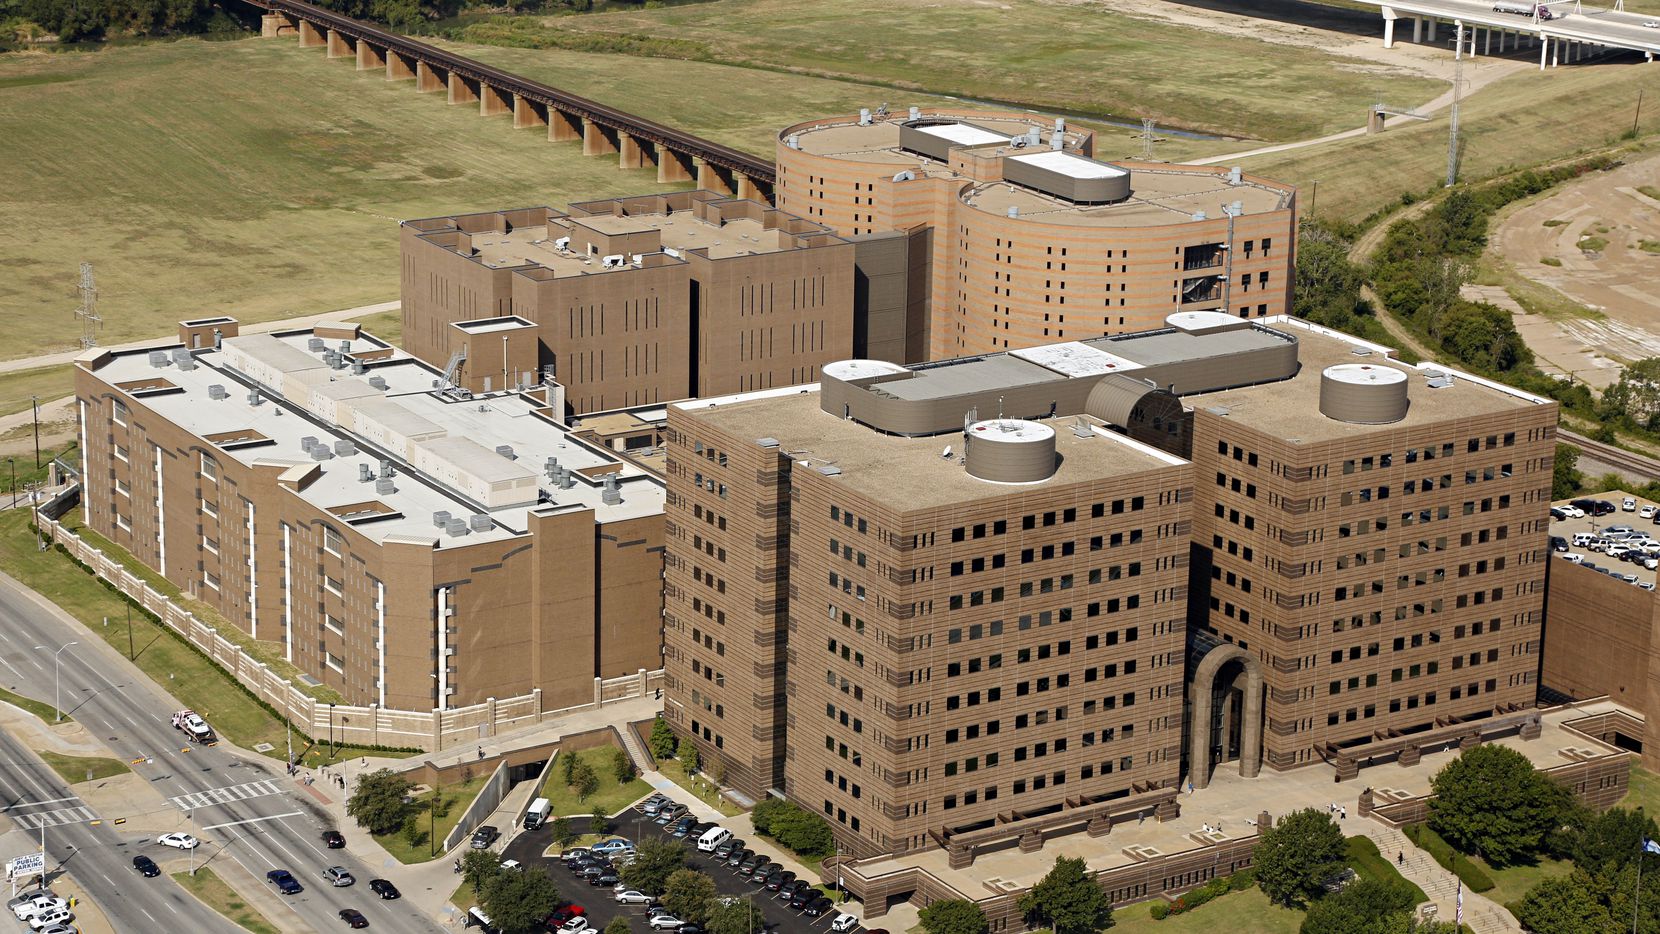 Dallas County Jail Inmates to Receive Tablets